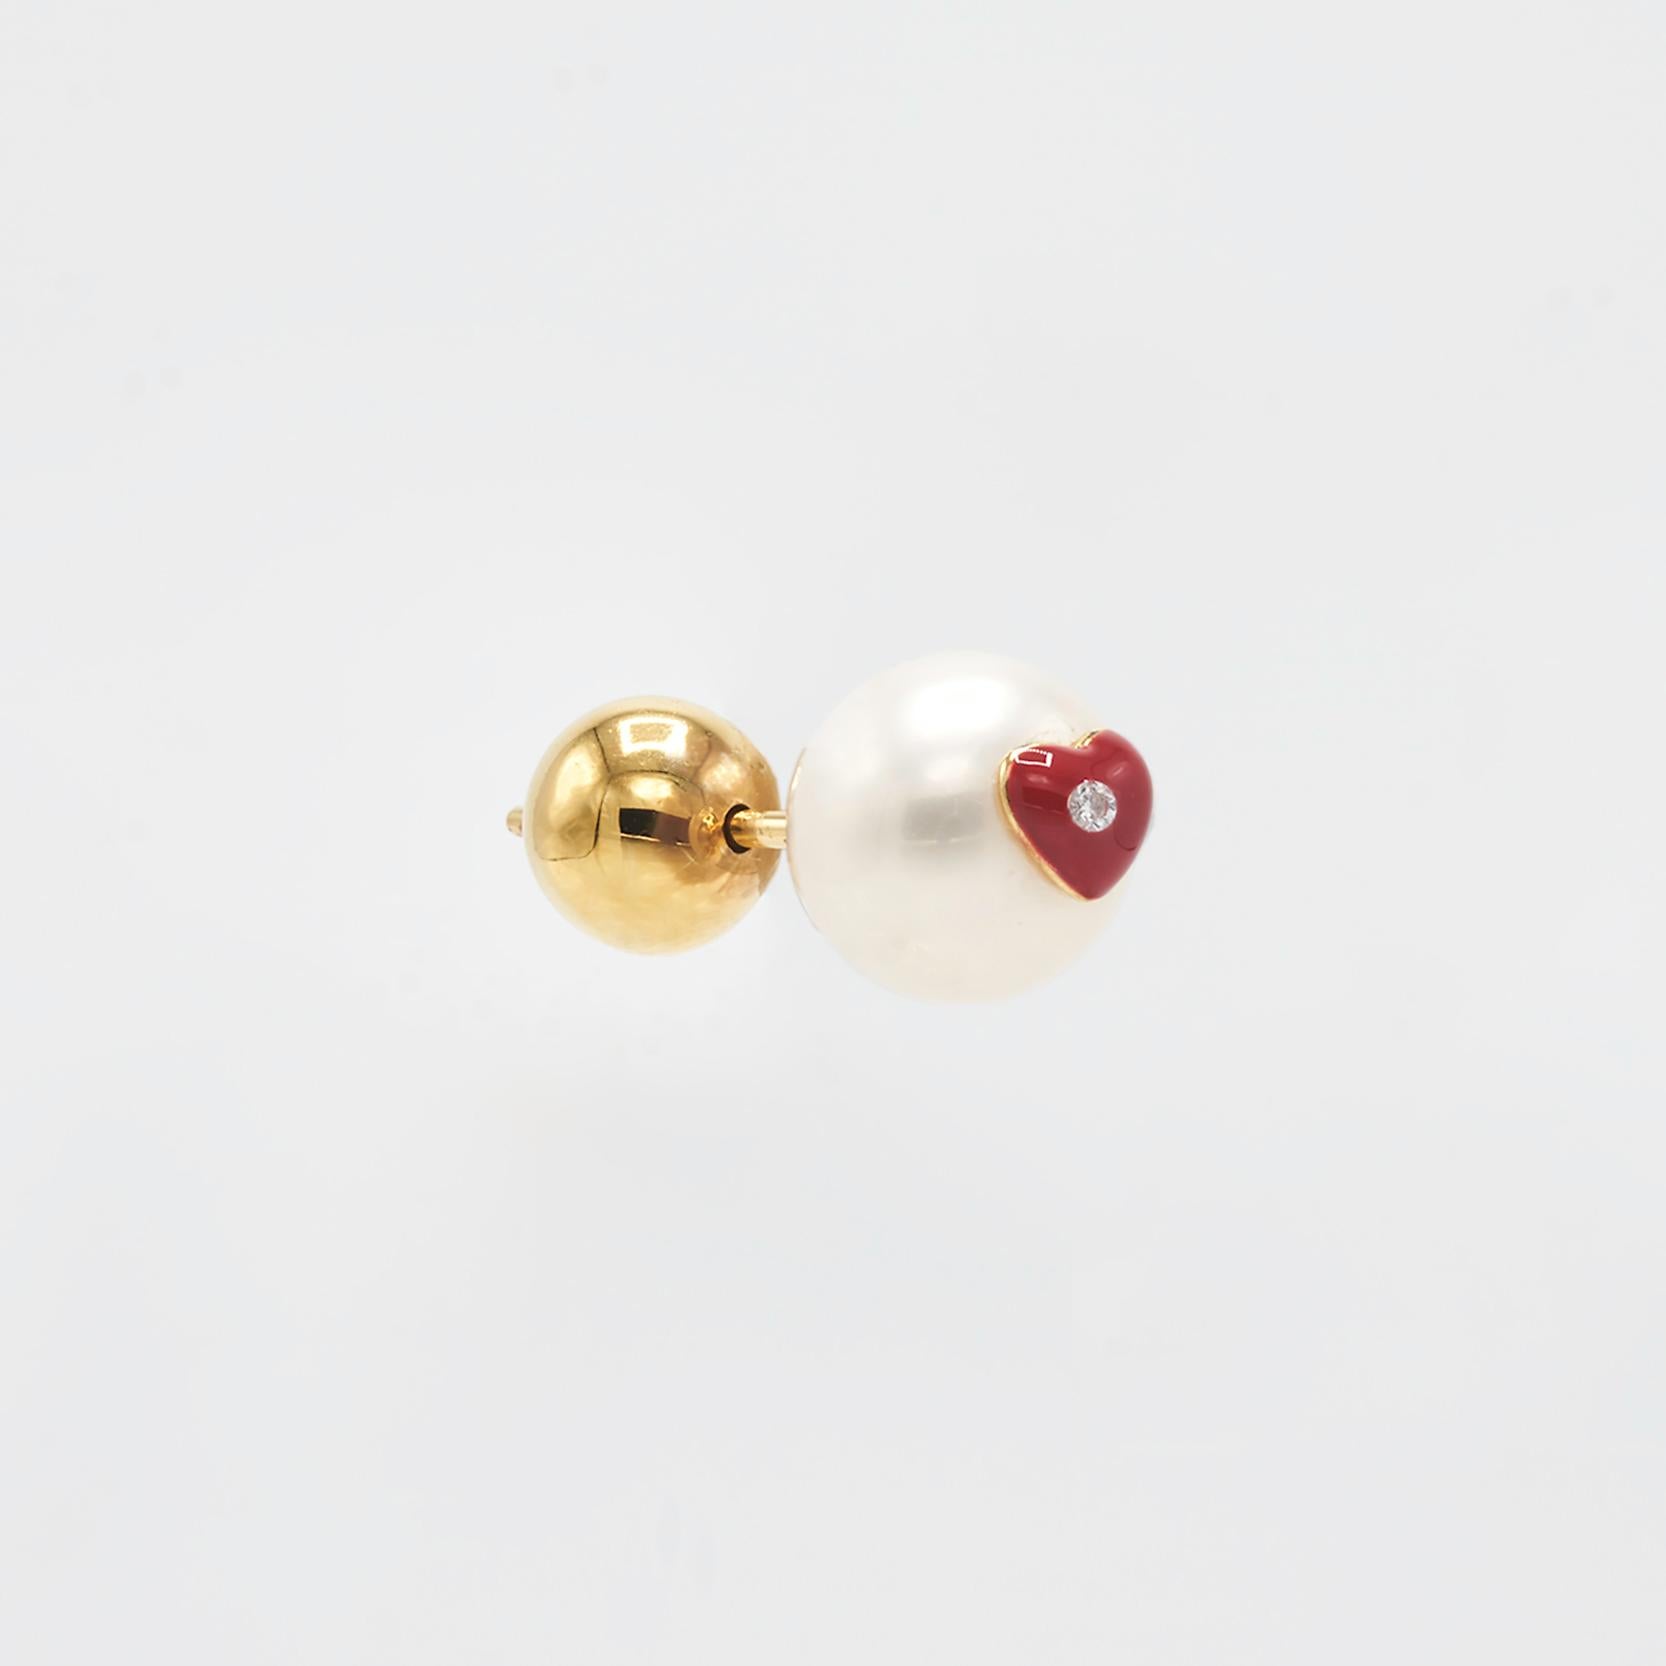 Round pearl ear studs embellished with red enamel heart.

Dimensions: 7mm Pearl
Compositions: Sterling Silver 24 K gold plates/ Fresh water pearl/ Red Enamel/ Cubic Zirconia

SOLD AS PAIRS